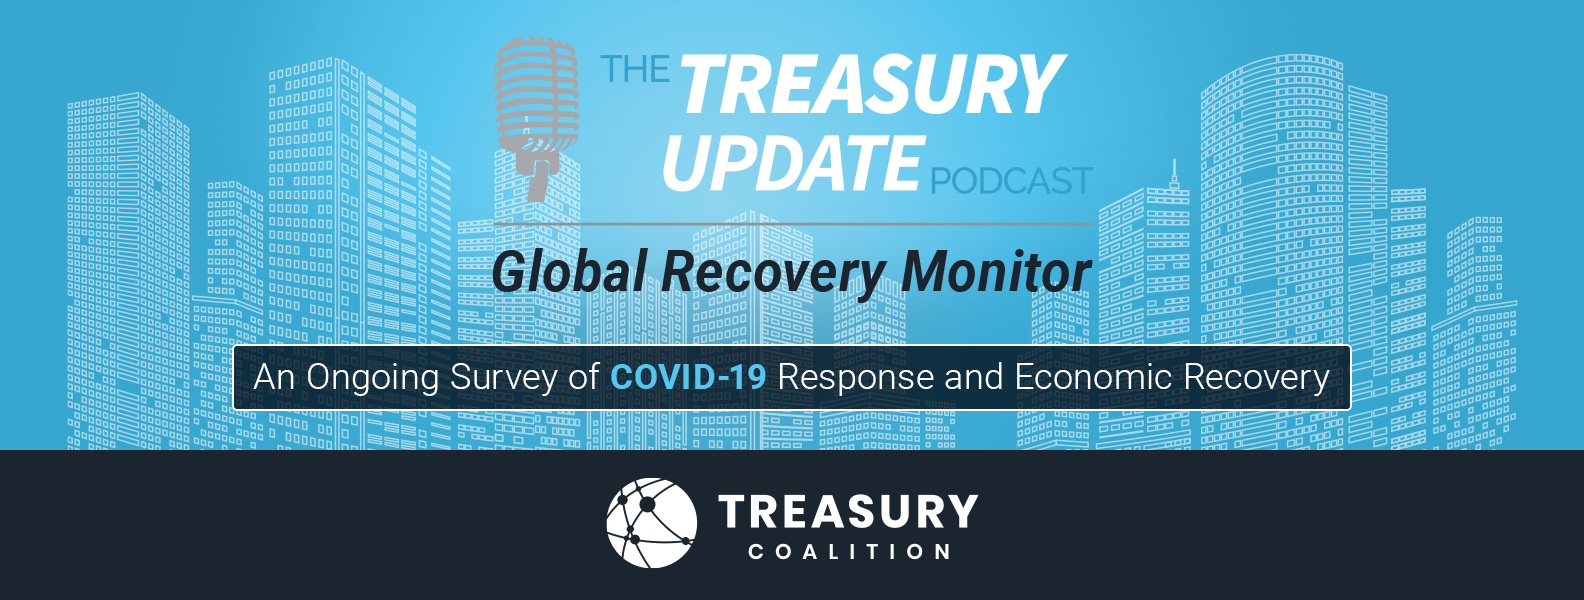 Global Recovery Monitor Series